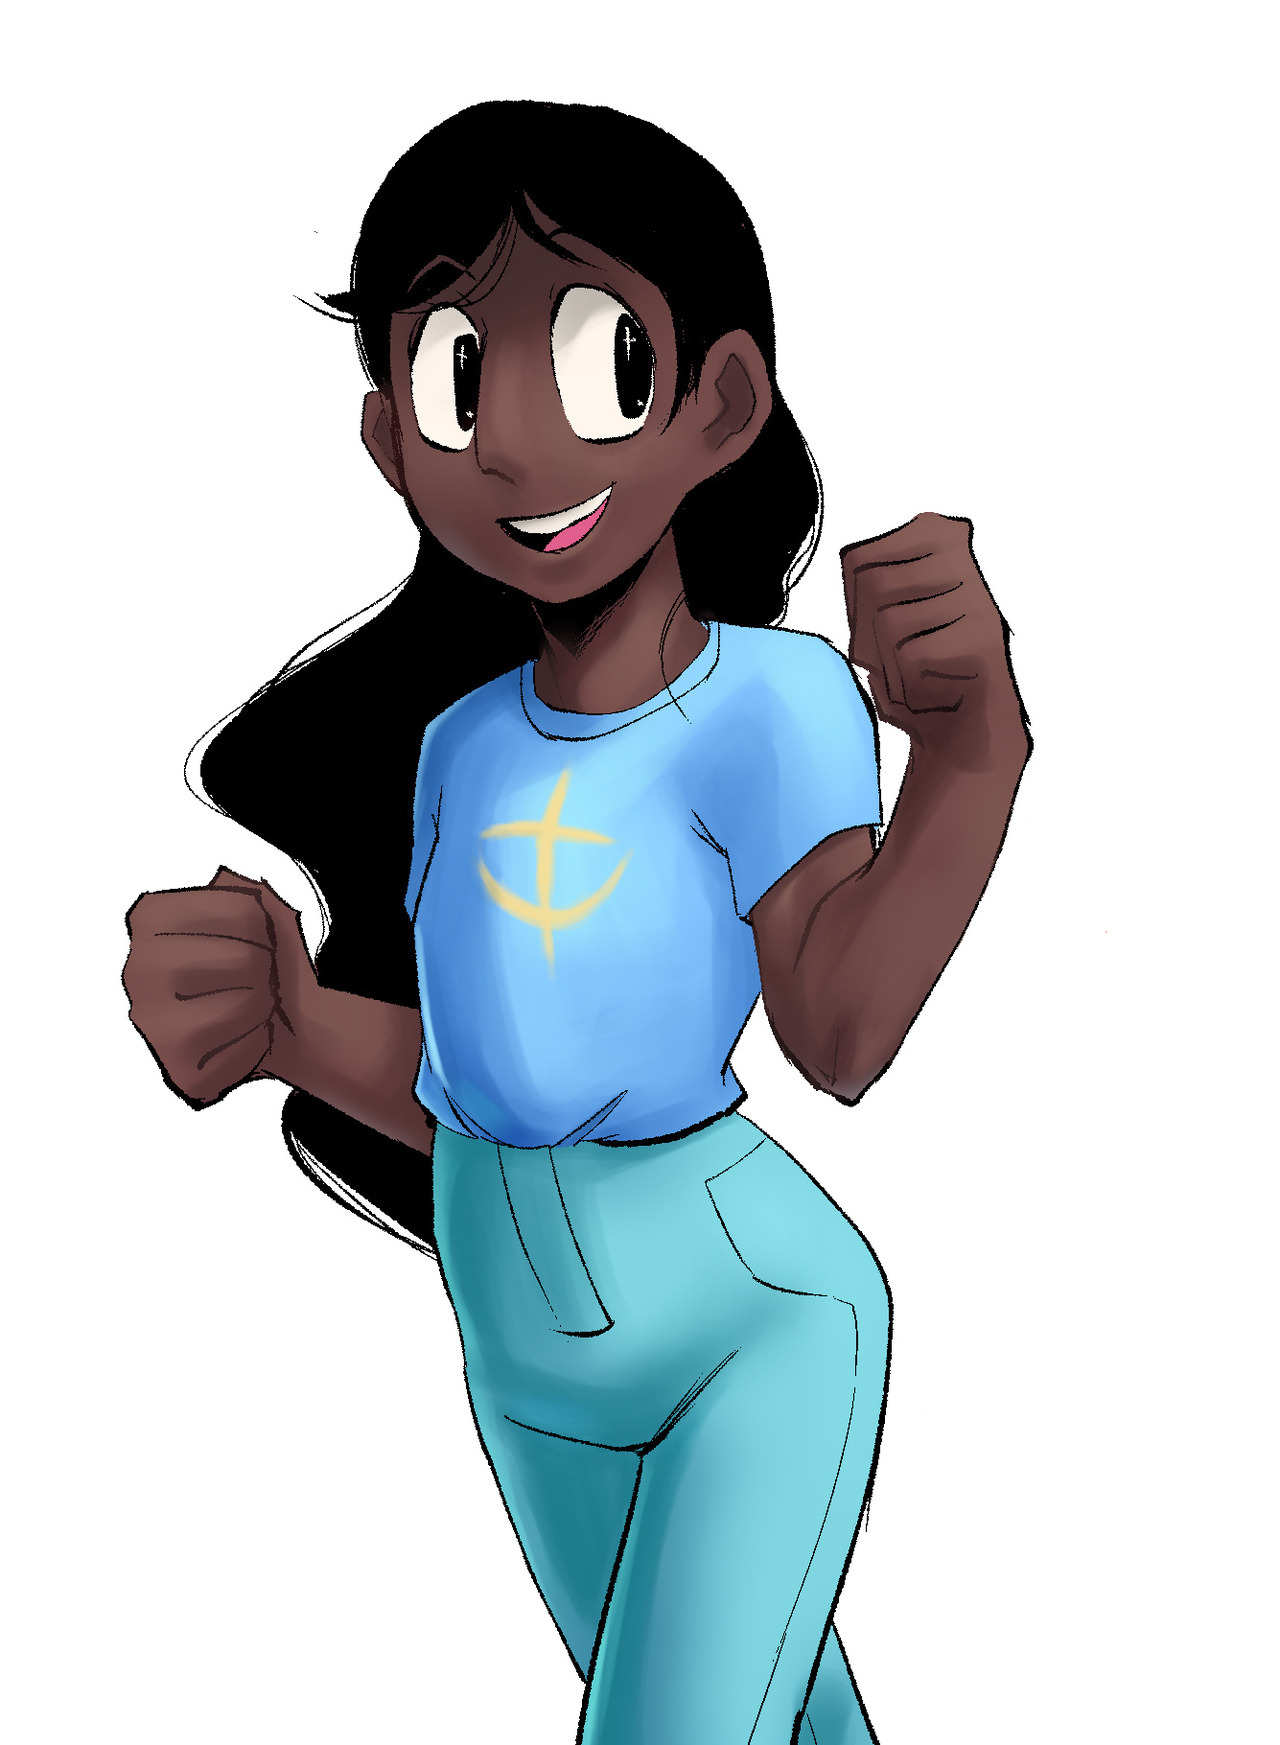 i used to draw connie wearing different t-shirts, here’s one more for the old times